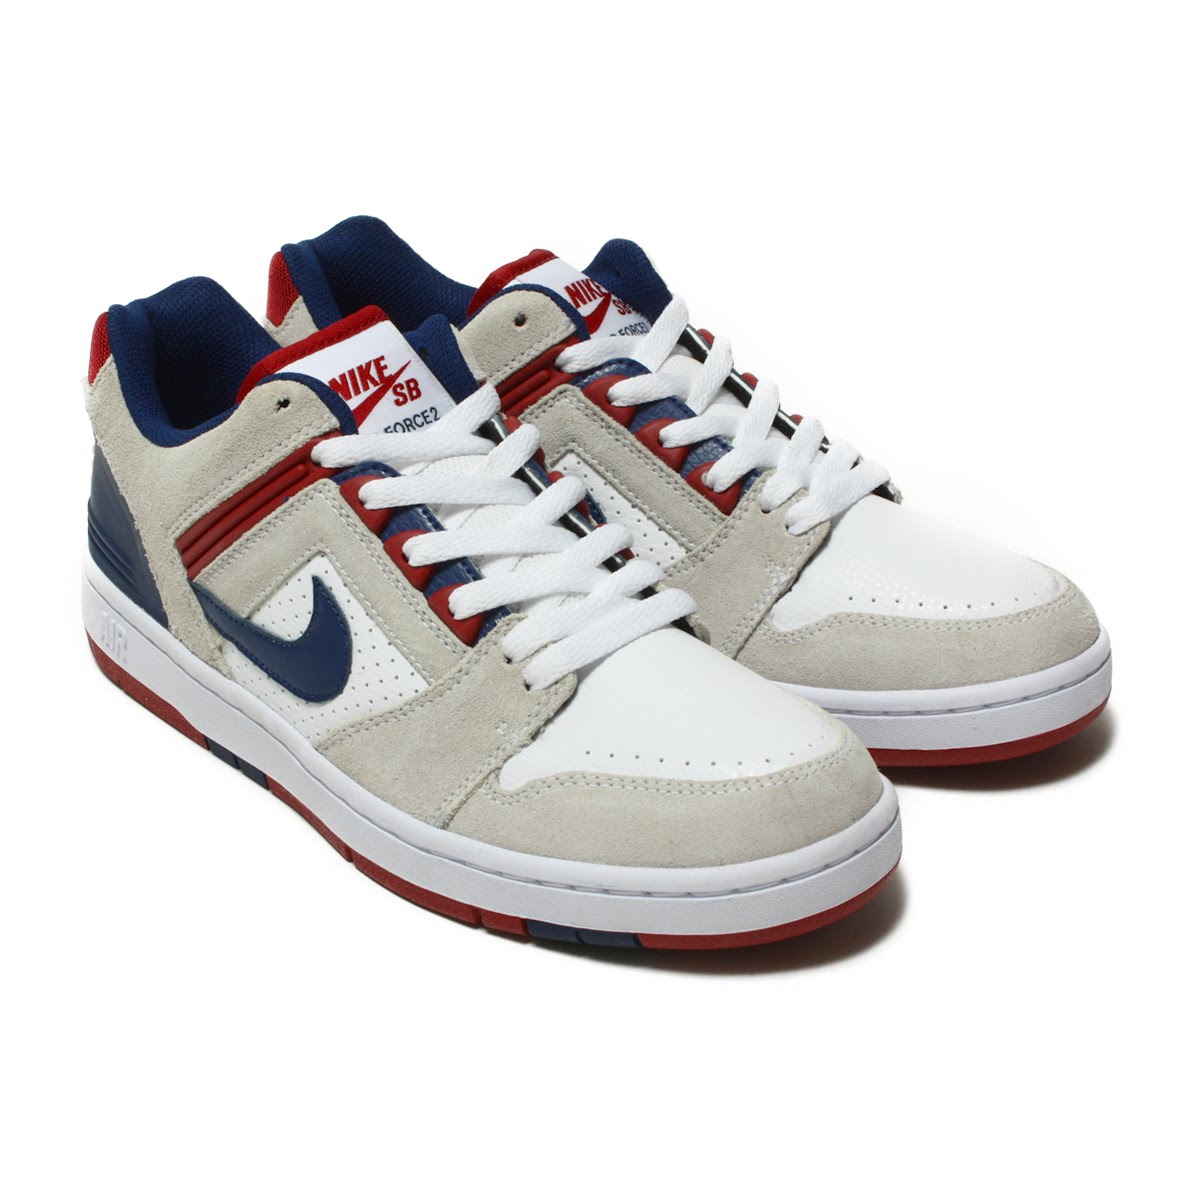 nike sb air force 2 low white blue red